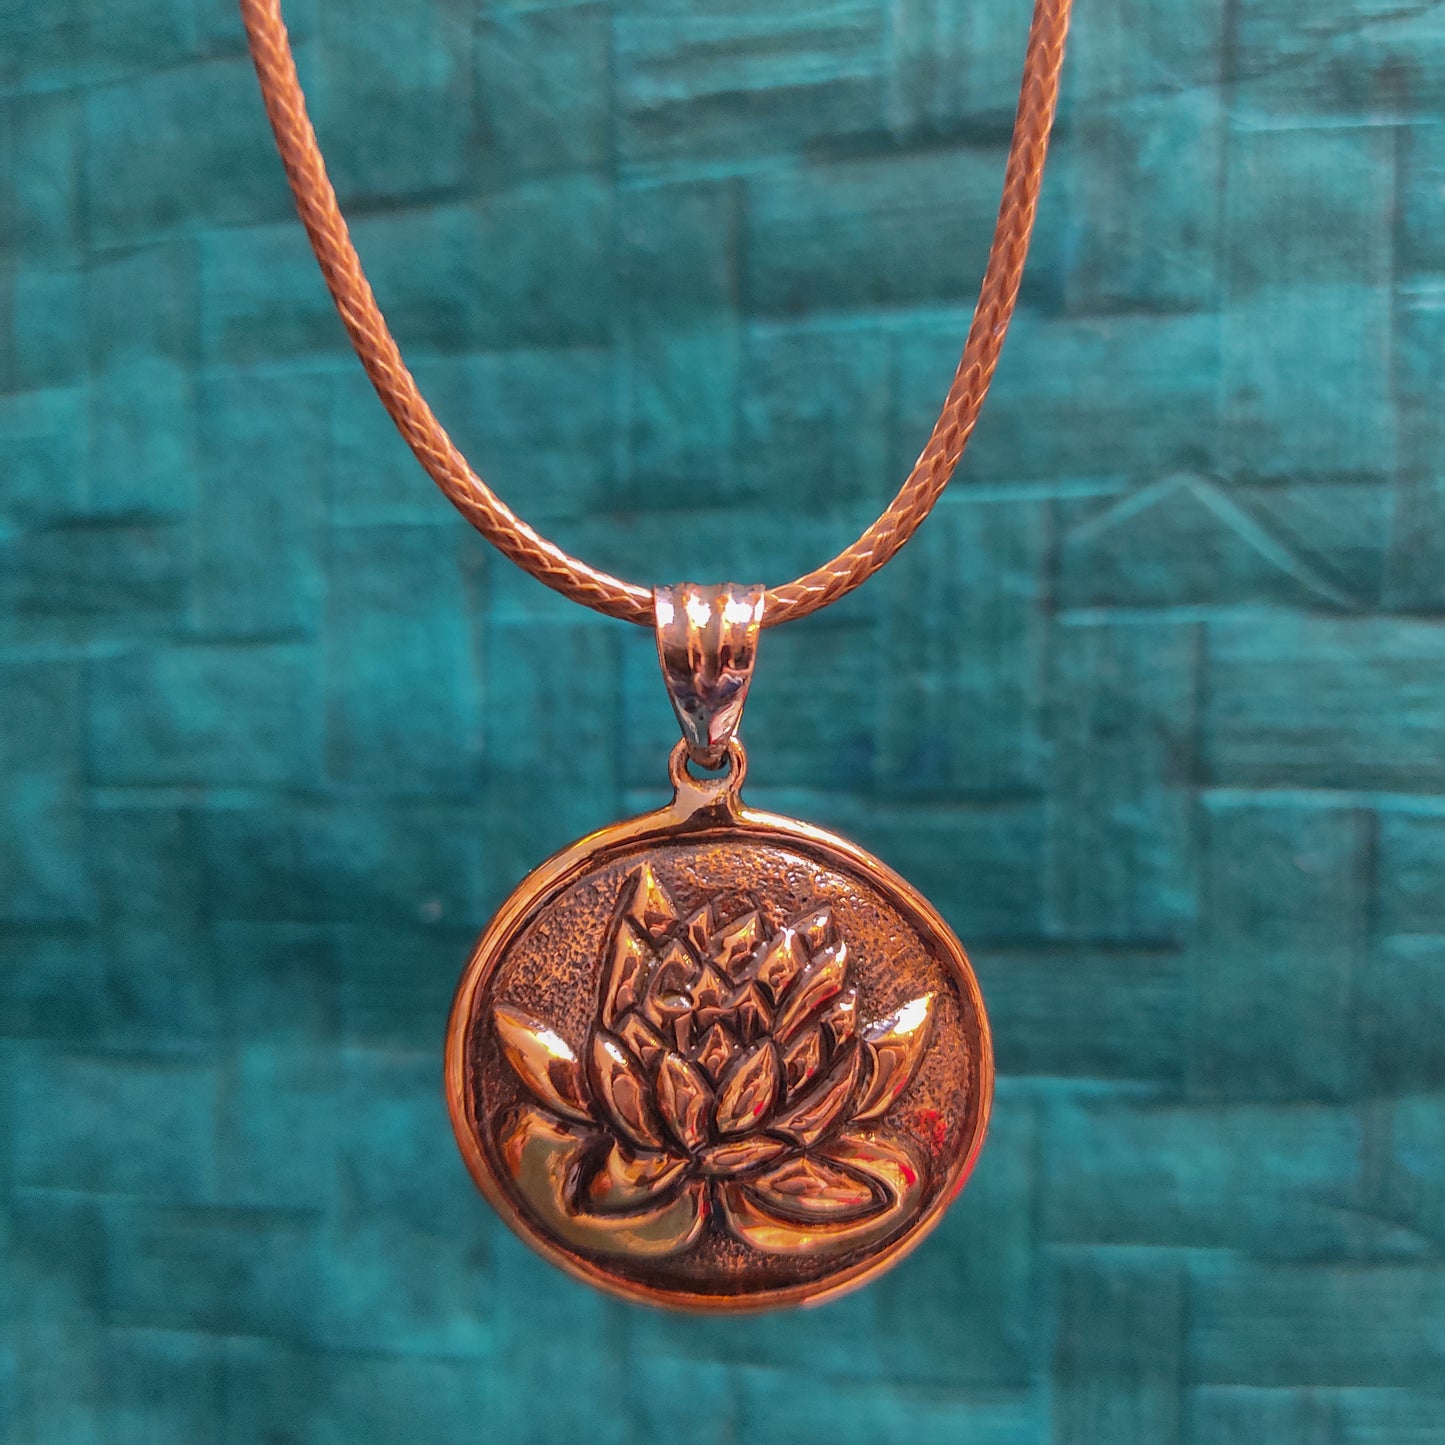 Pure Copper Lotus Flower Pendant Necklace - Spiritual Amulet Jewelry Gift